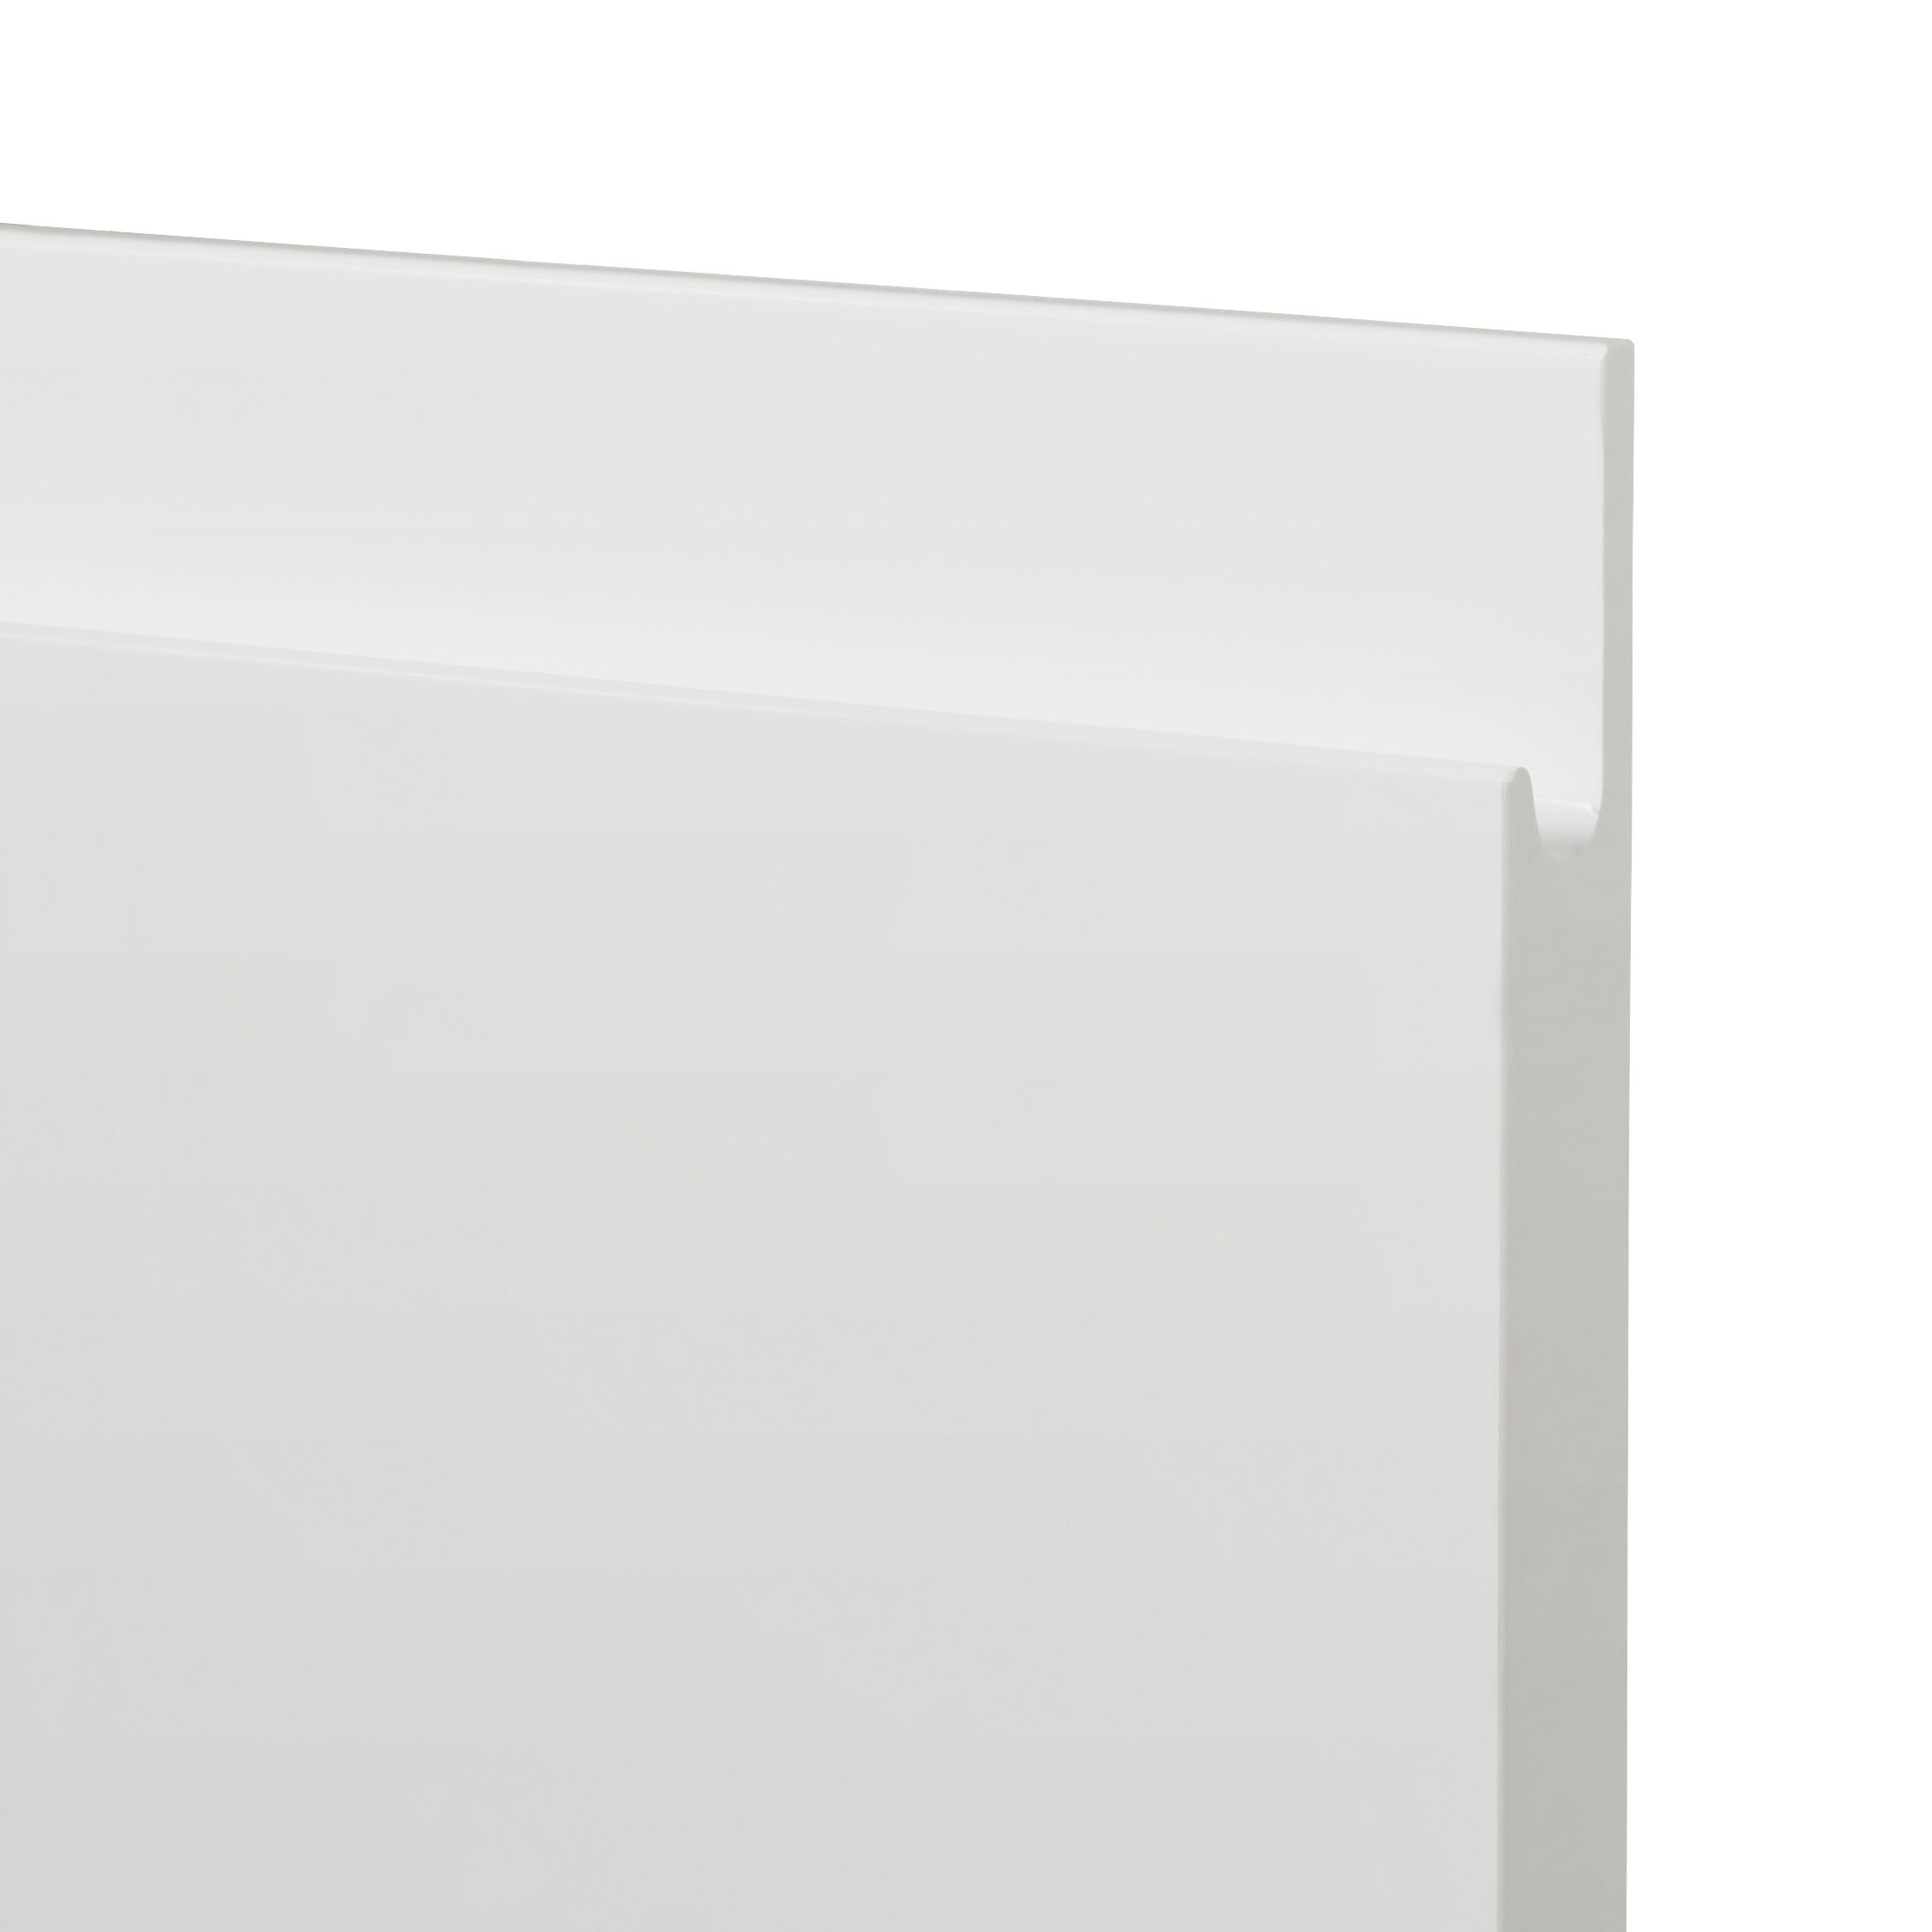 GoodHome Garcinia Gloss white integrated handle Tall wall Cabinet door (W)150mm (H)895mm (T)19mm